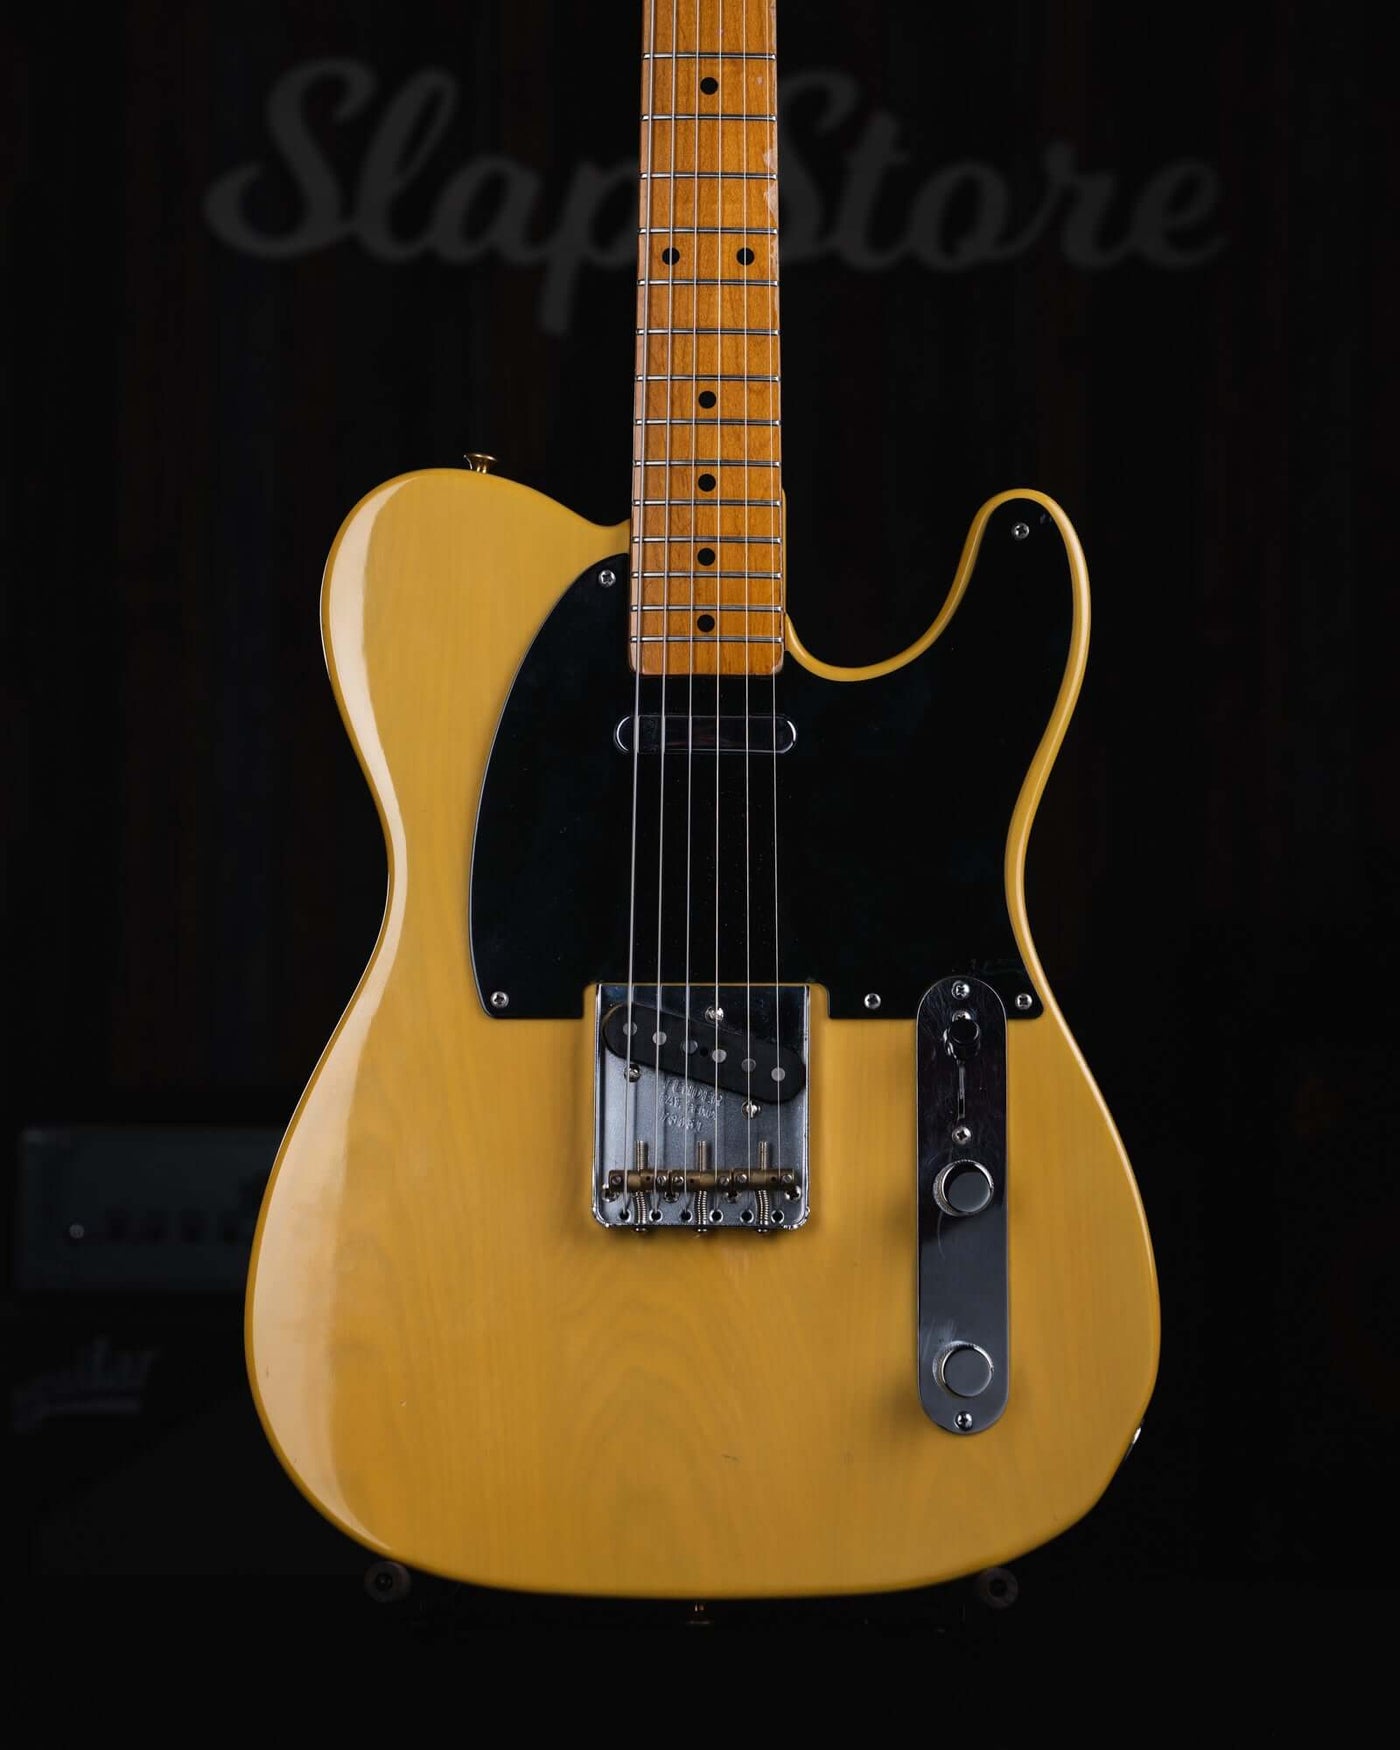 Fender Telecaster RI'52 Butterscotch Blonde MIJ '89 - $1699990 - Gearhub - Produced in 1989 at the Fender Corona plant, this almost 30 year old '52 Tele Re-issue is in excellent original condition. (Just a small ding by the input jack.) Here is a great playing example of those early Corona built Tele Re-issues that are highly sought after because of their attention to detail and affordability. Comes with the original COA dated January 31 1989. With it's Butterscotch see-through finish, single-ply black pick